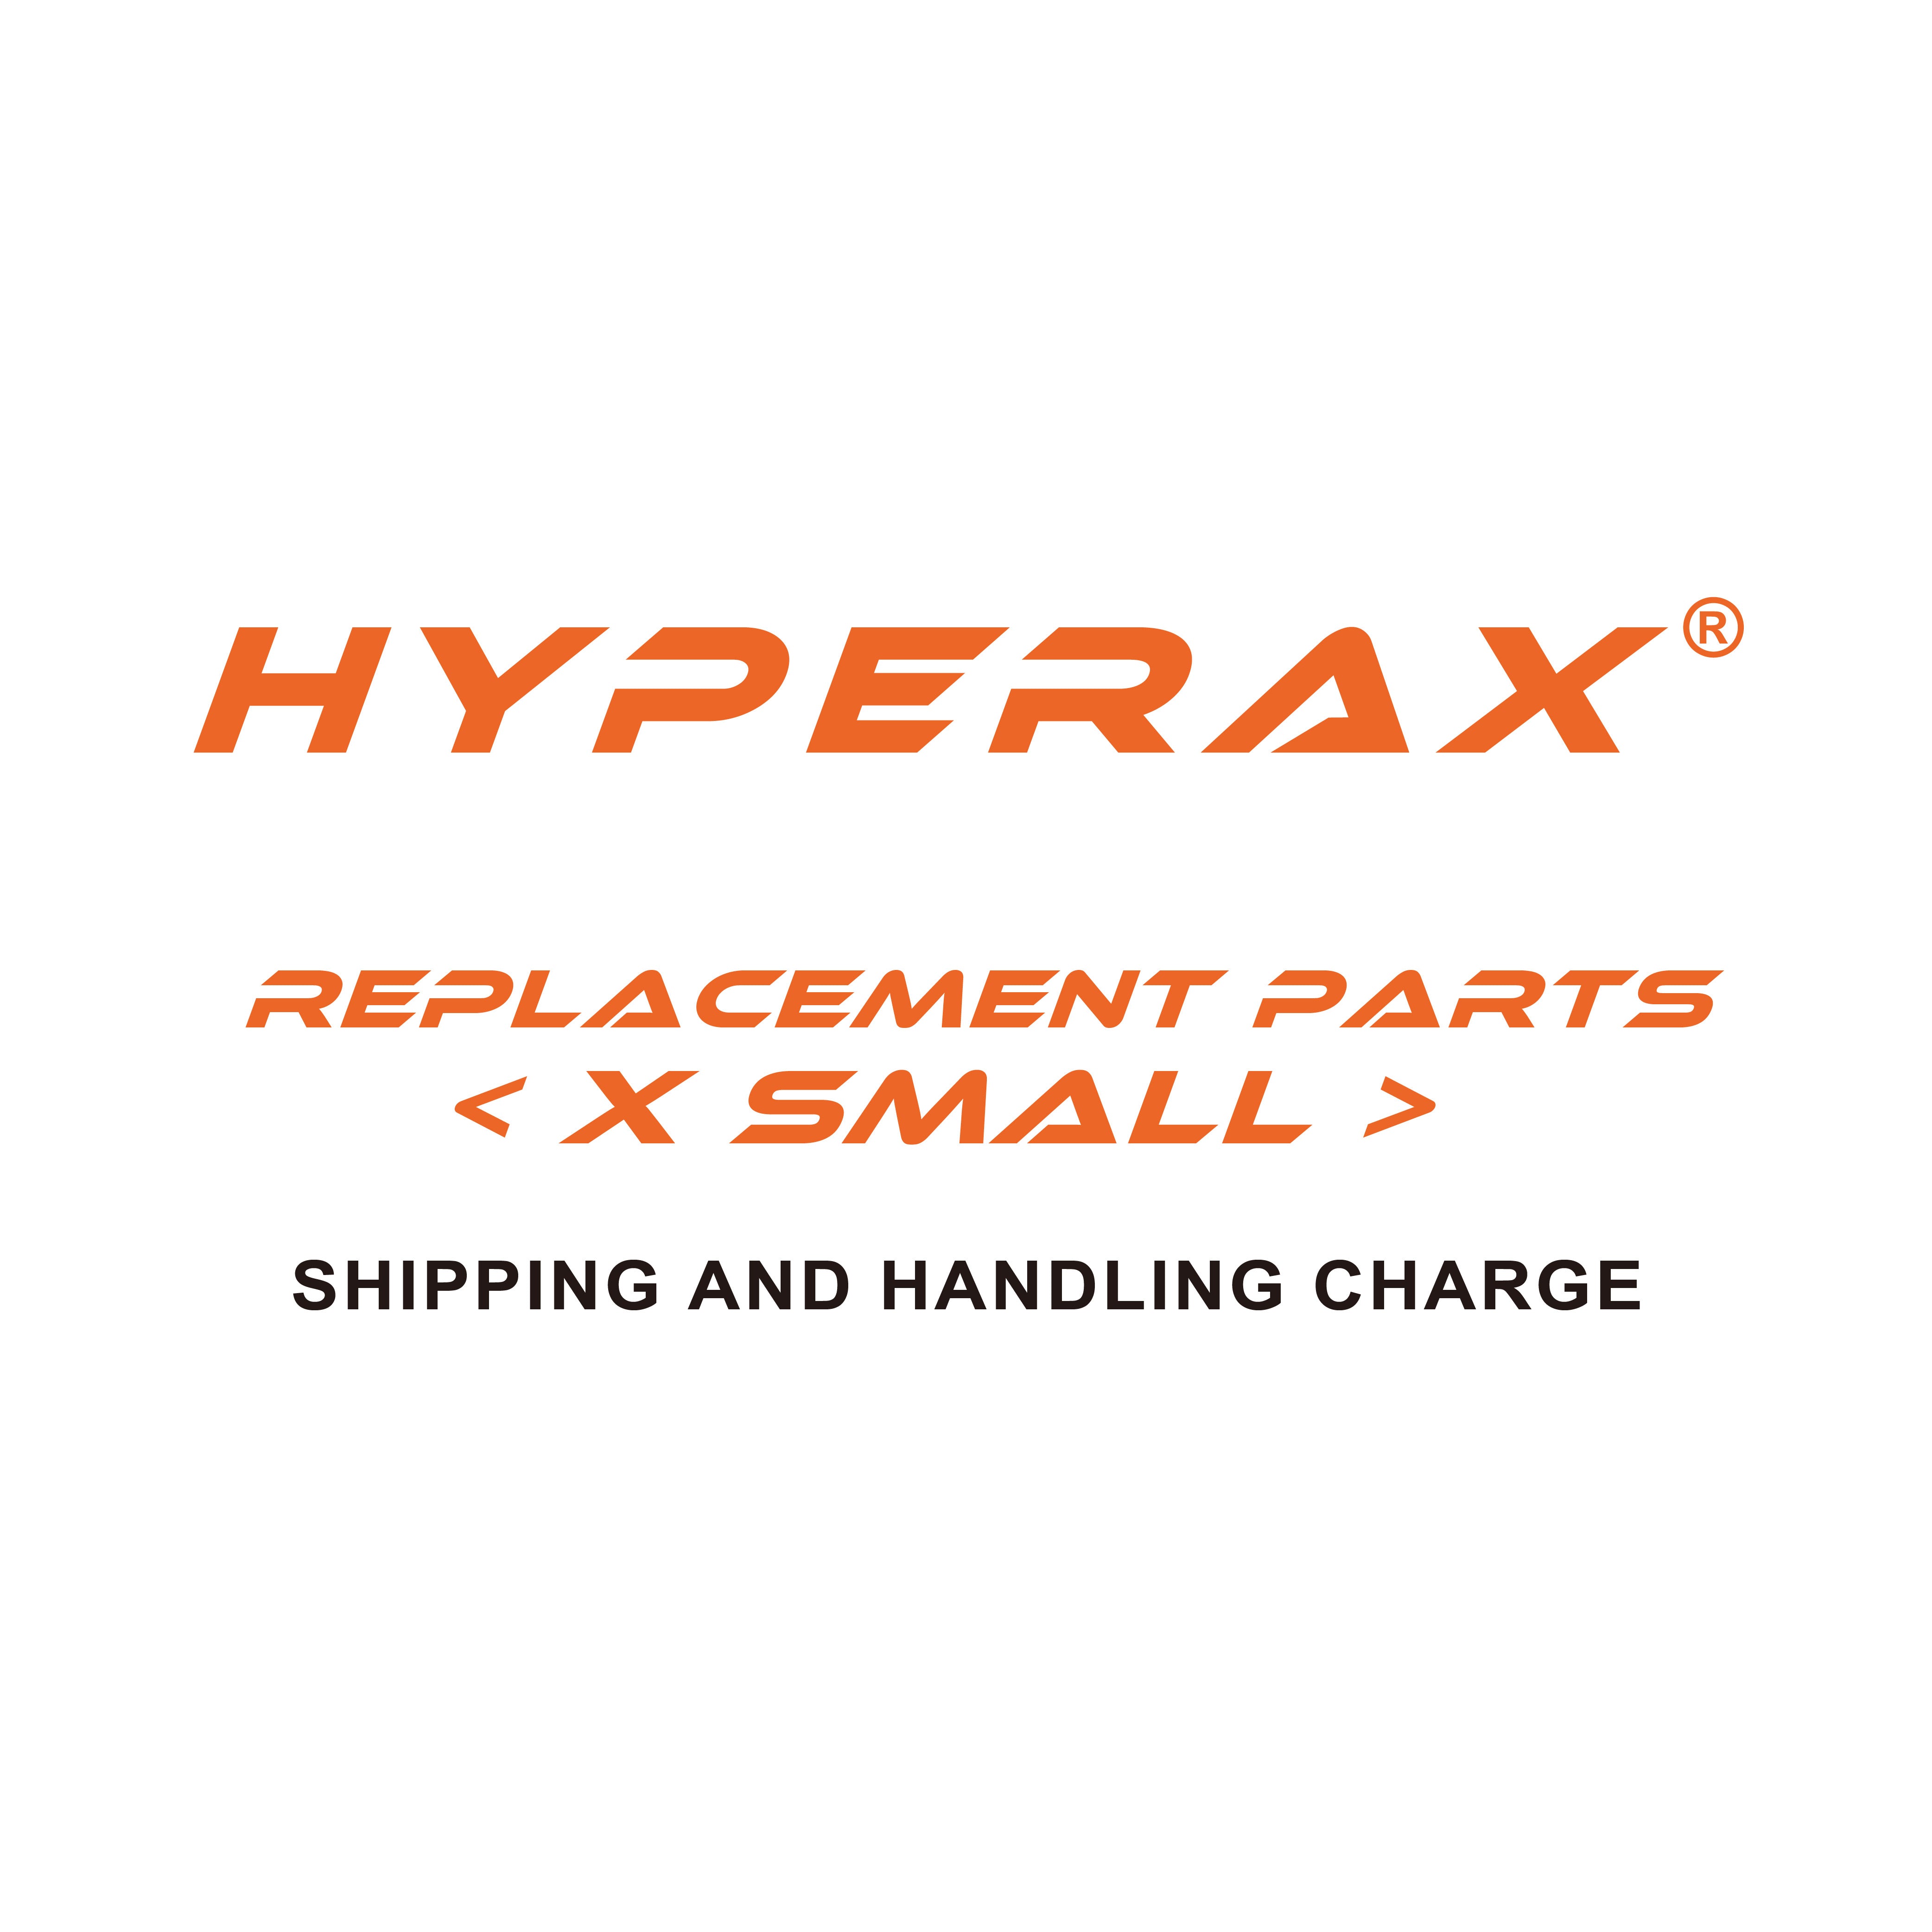 Shipping & Handling fee  －  Replacement parts － ＜X Small ＞